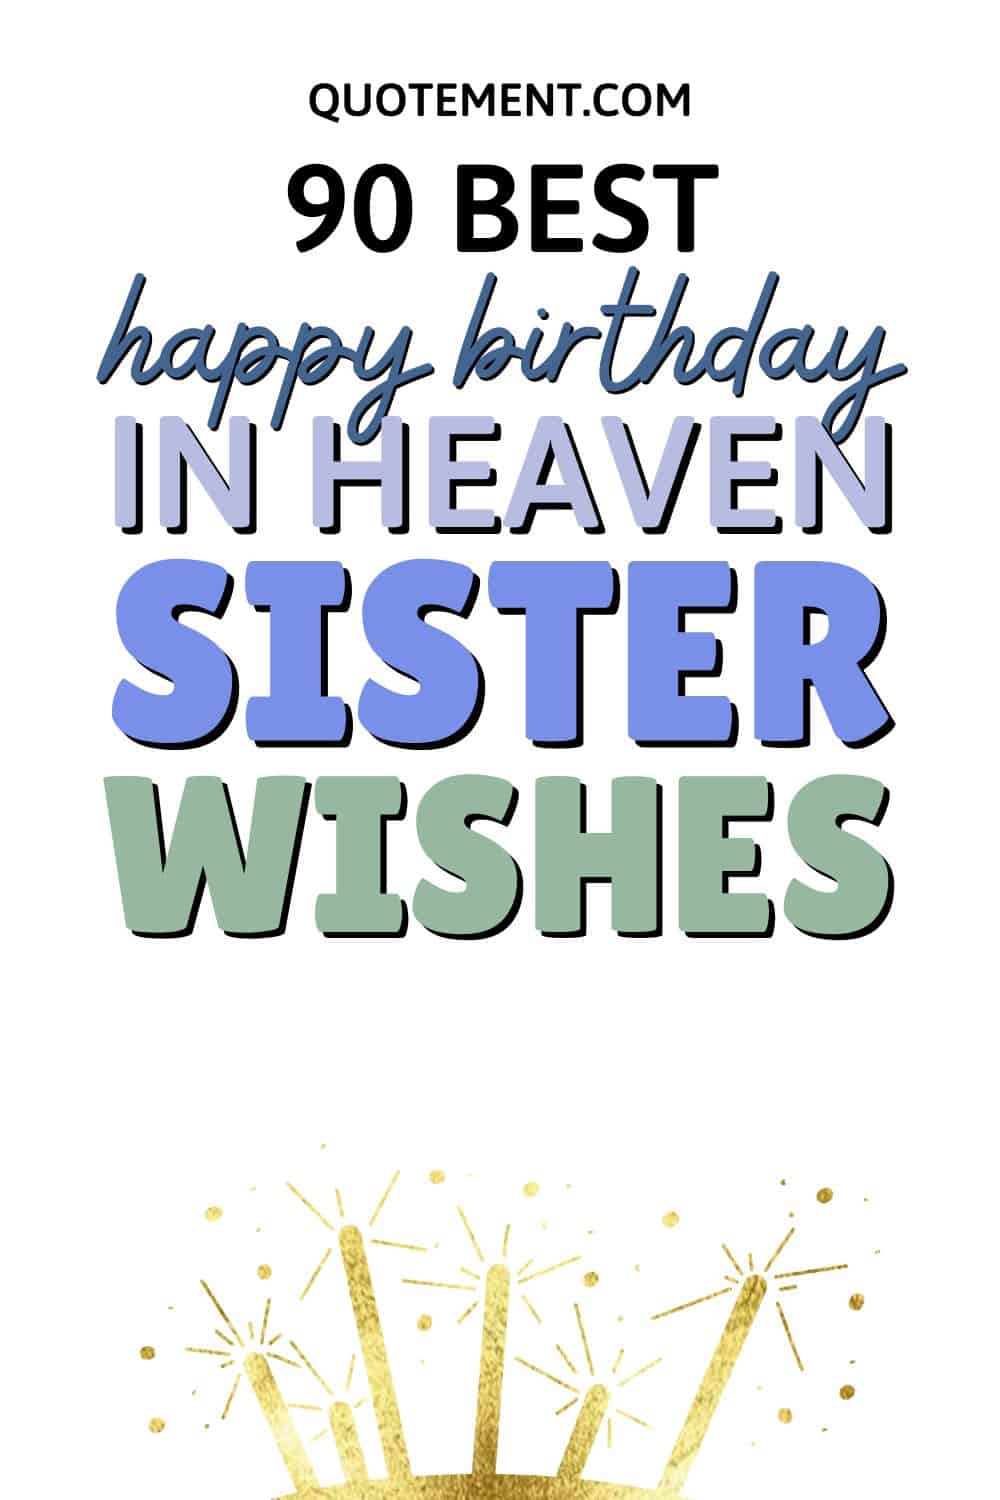 90 Happy Birthday In Heaven Sister Wishes For Your Angel